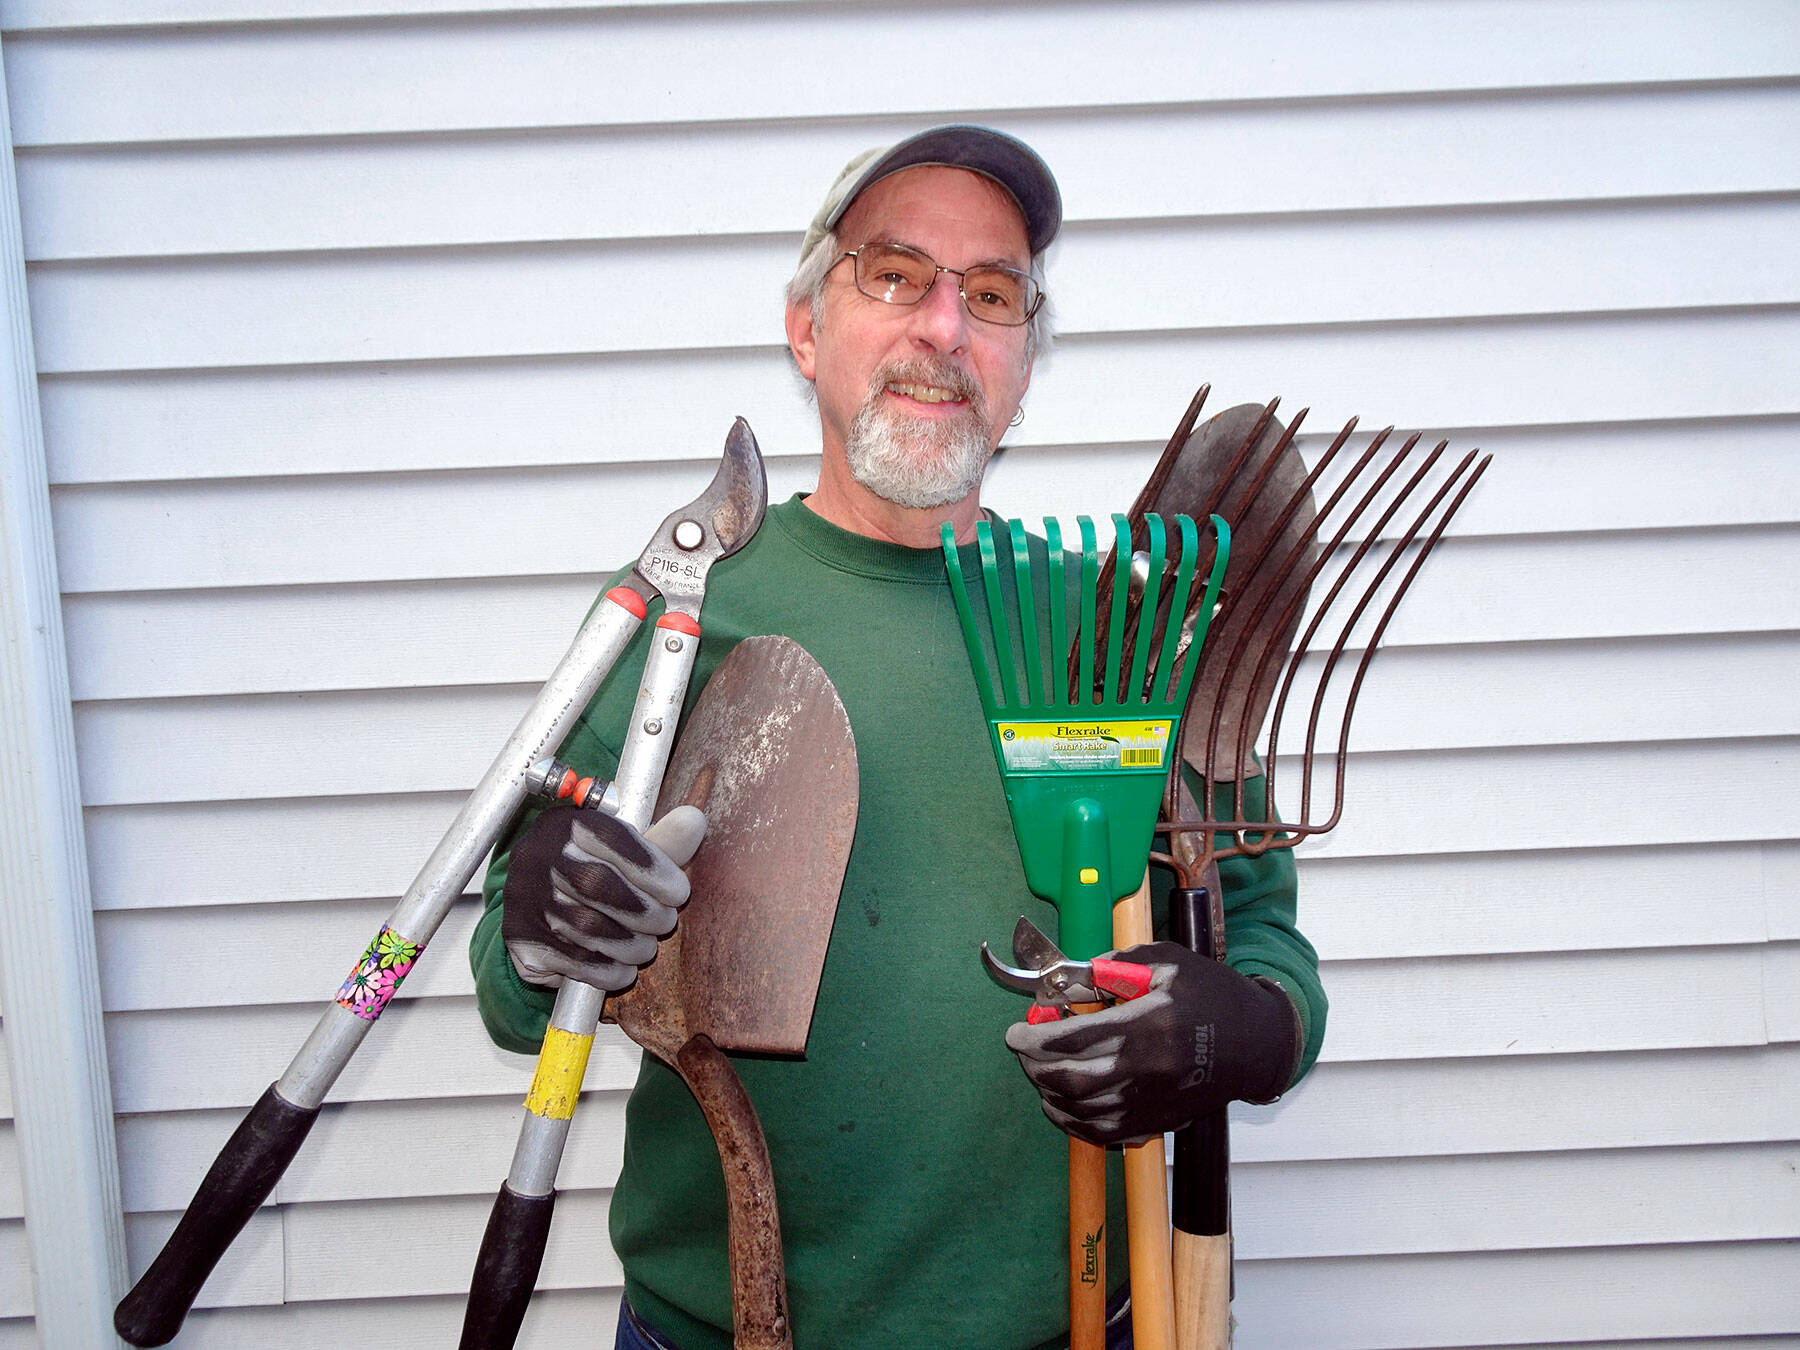 Keith Dekker will present “Tool Talk – Taking Care of Your Garden Tools” at noon on Thursday.